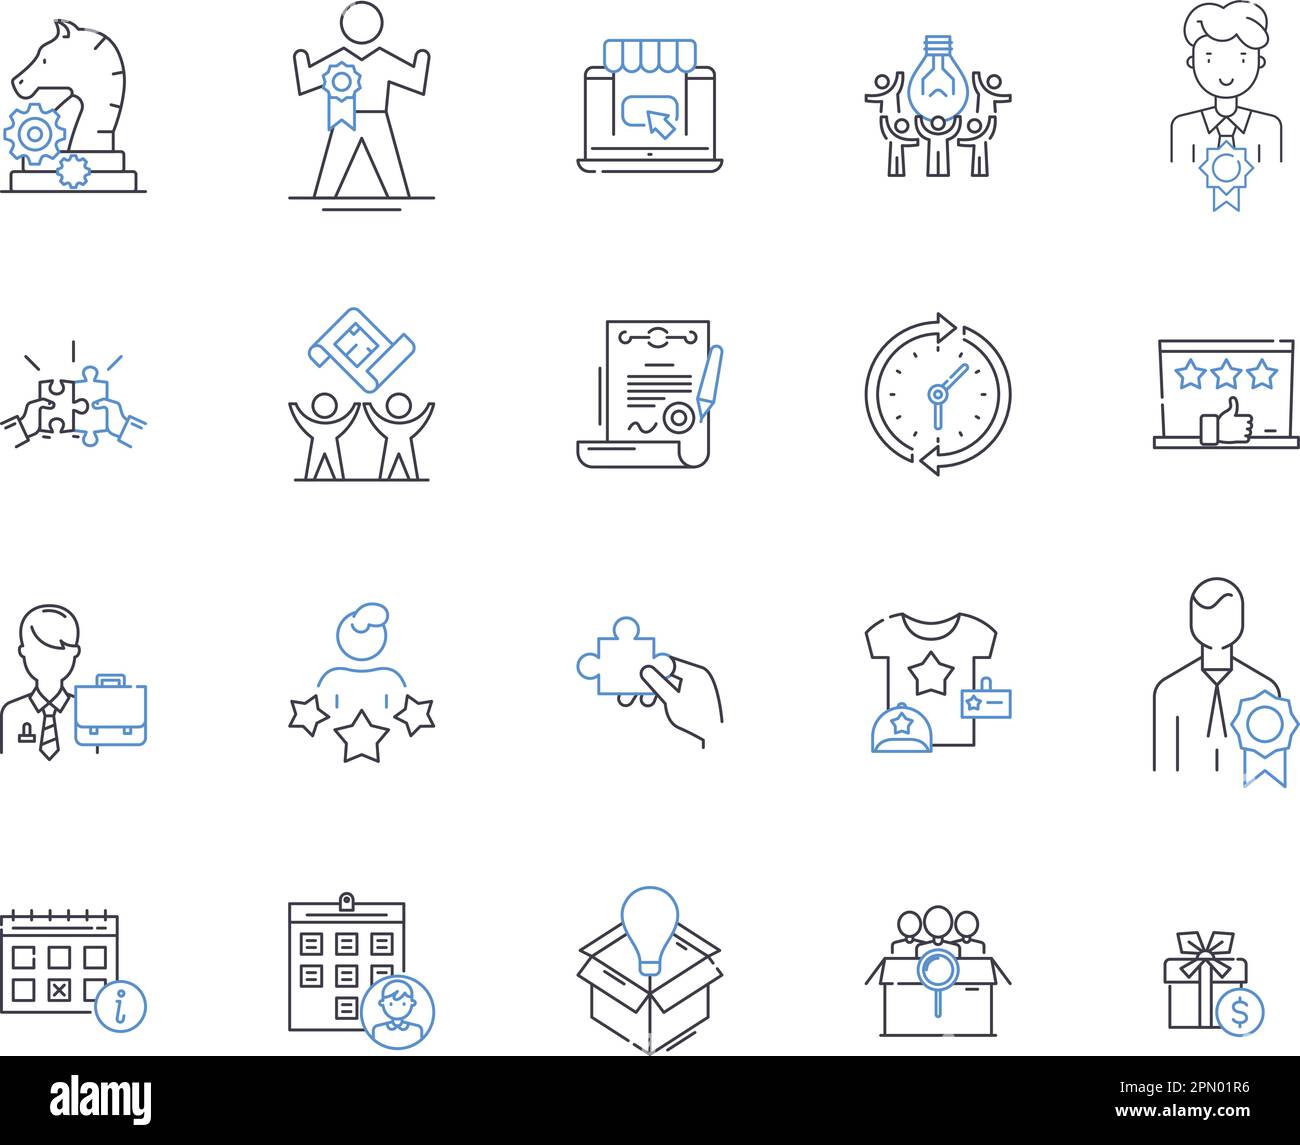 Marketing and concept outline icons collection. marketing, concept, strategy, planning, segmentation, targeting, positioning vector and illustration Stock Vector